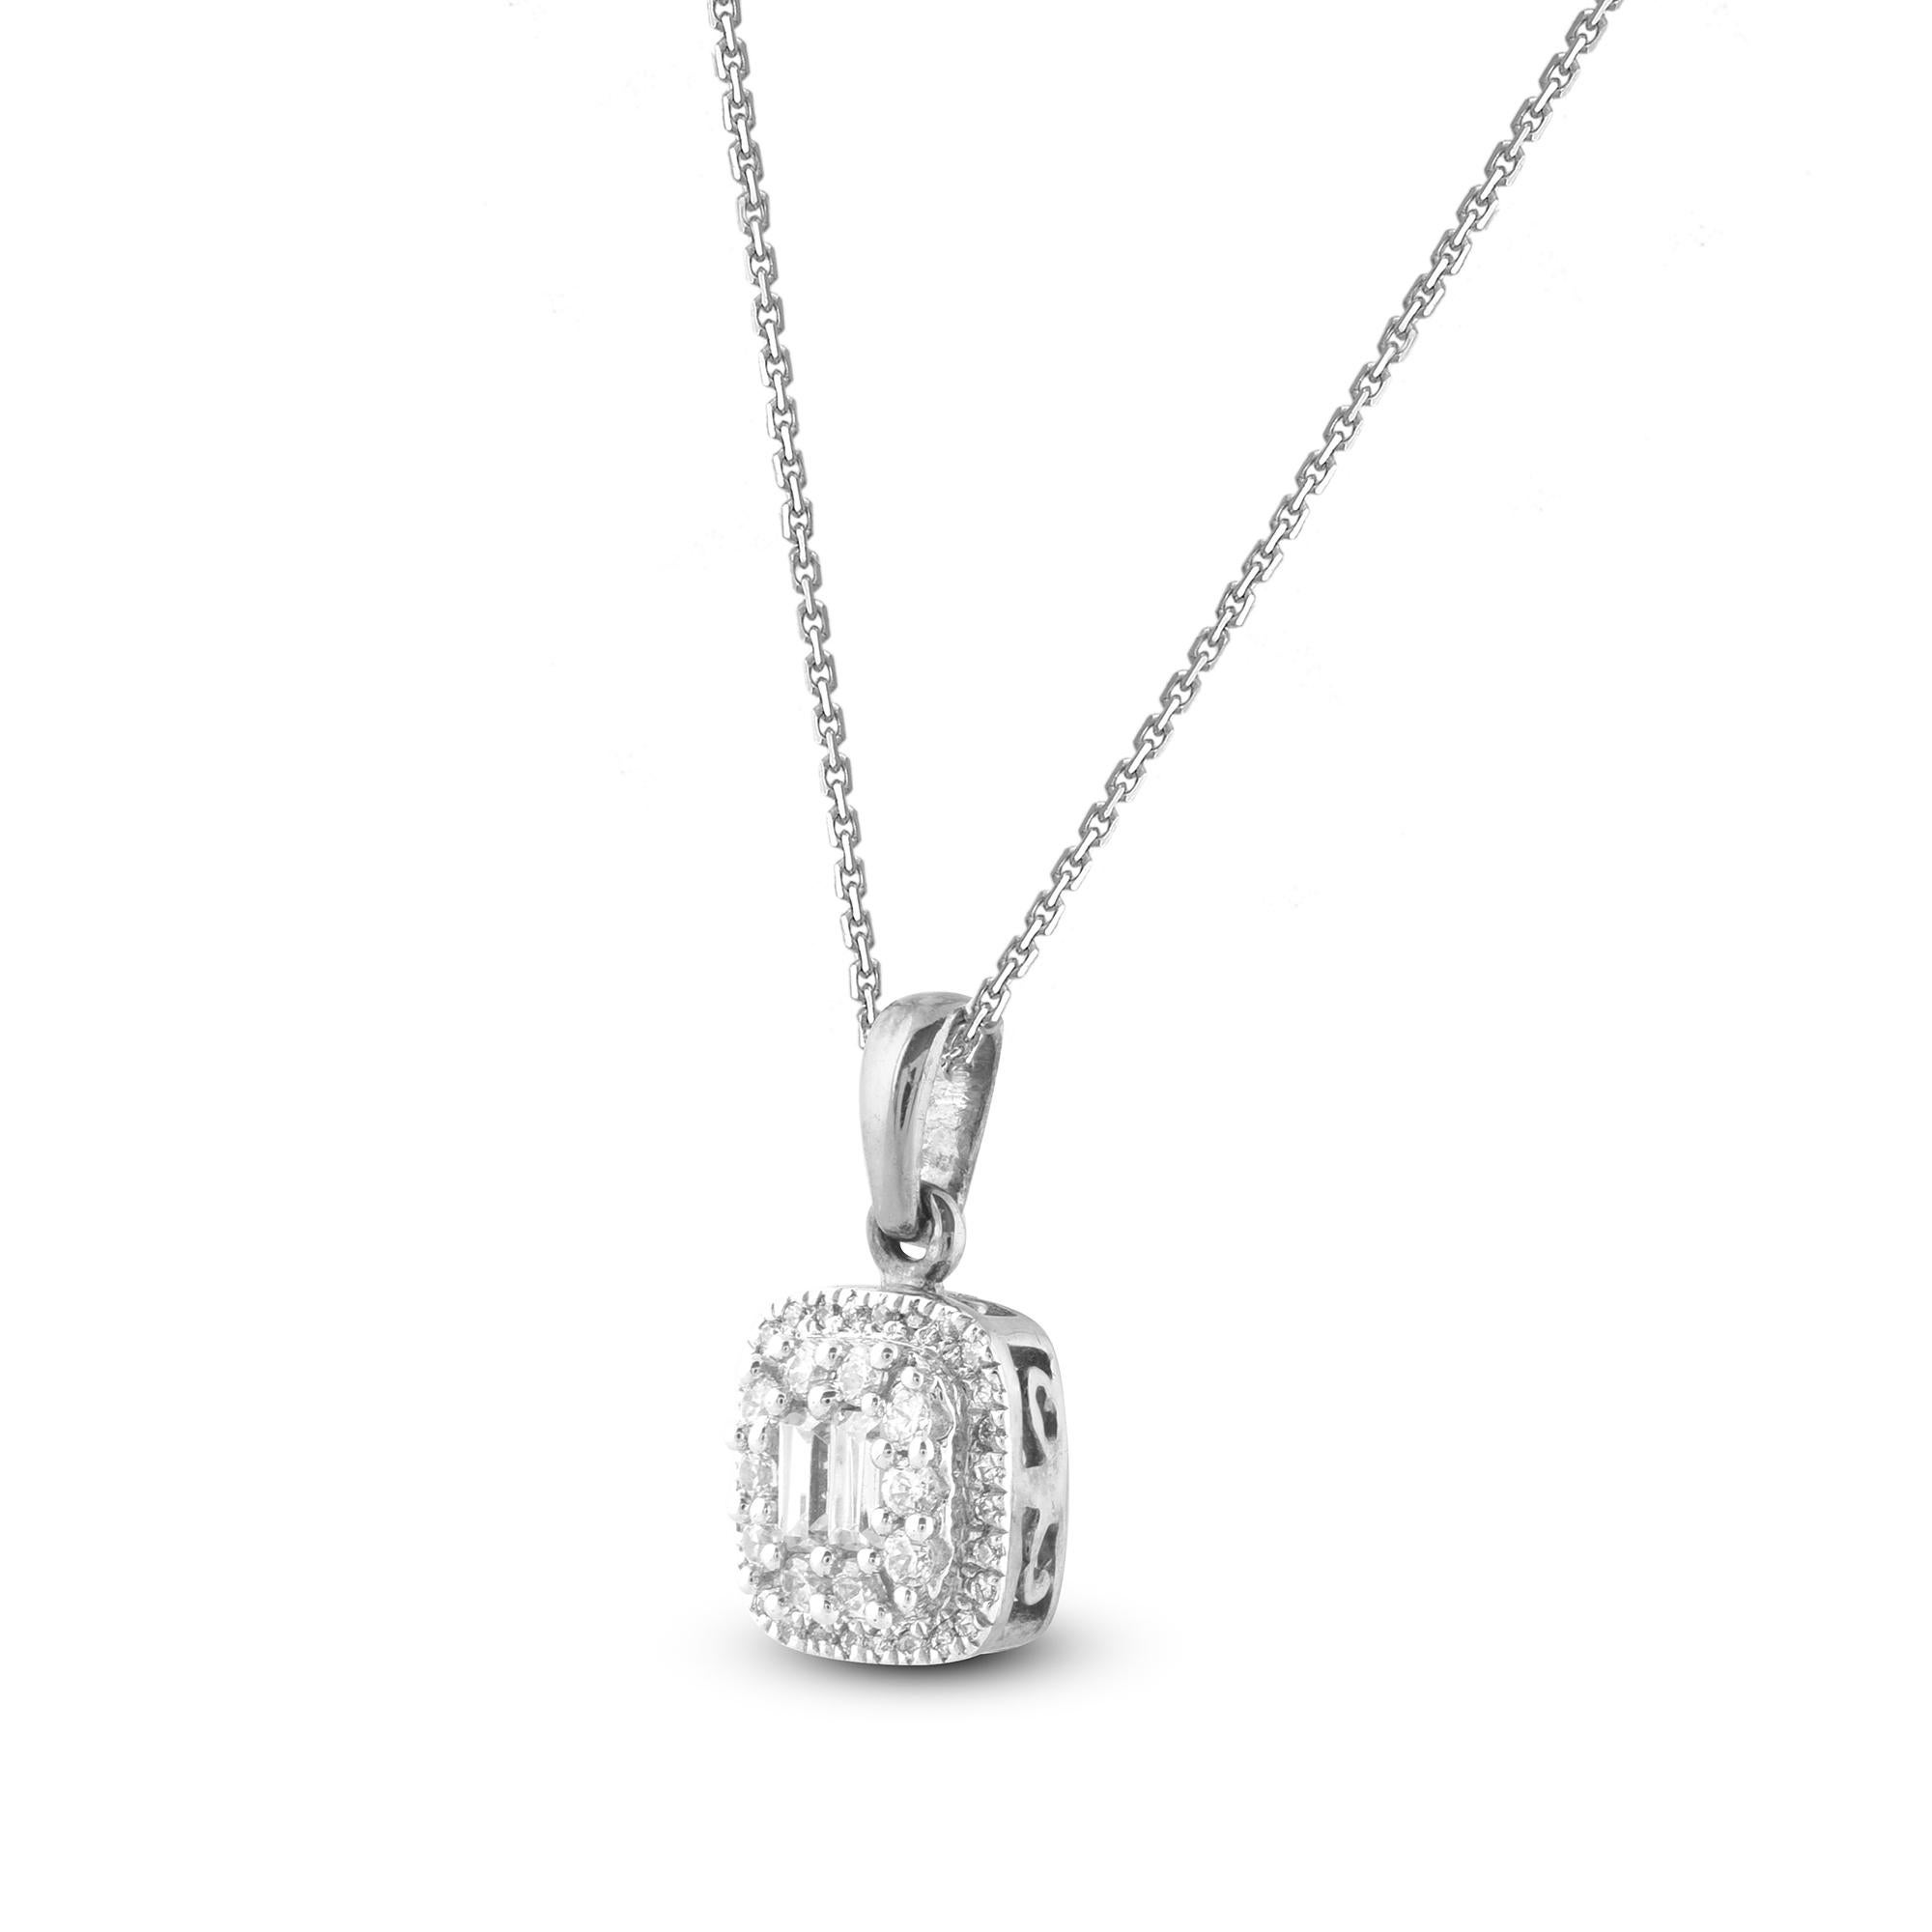 This Round Diamond Cushion Frame Pendant in 14K gold showcases 0.25 carats of sparkling 38 round and 2 baguette diamond set in prong and micro pave setting, H-I color I2 clarity. Featuring a fabulous design and a highly polished gold finish, this